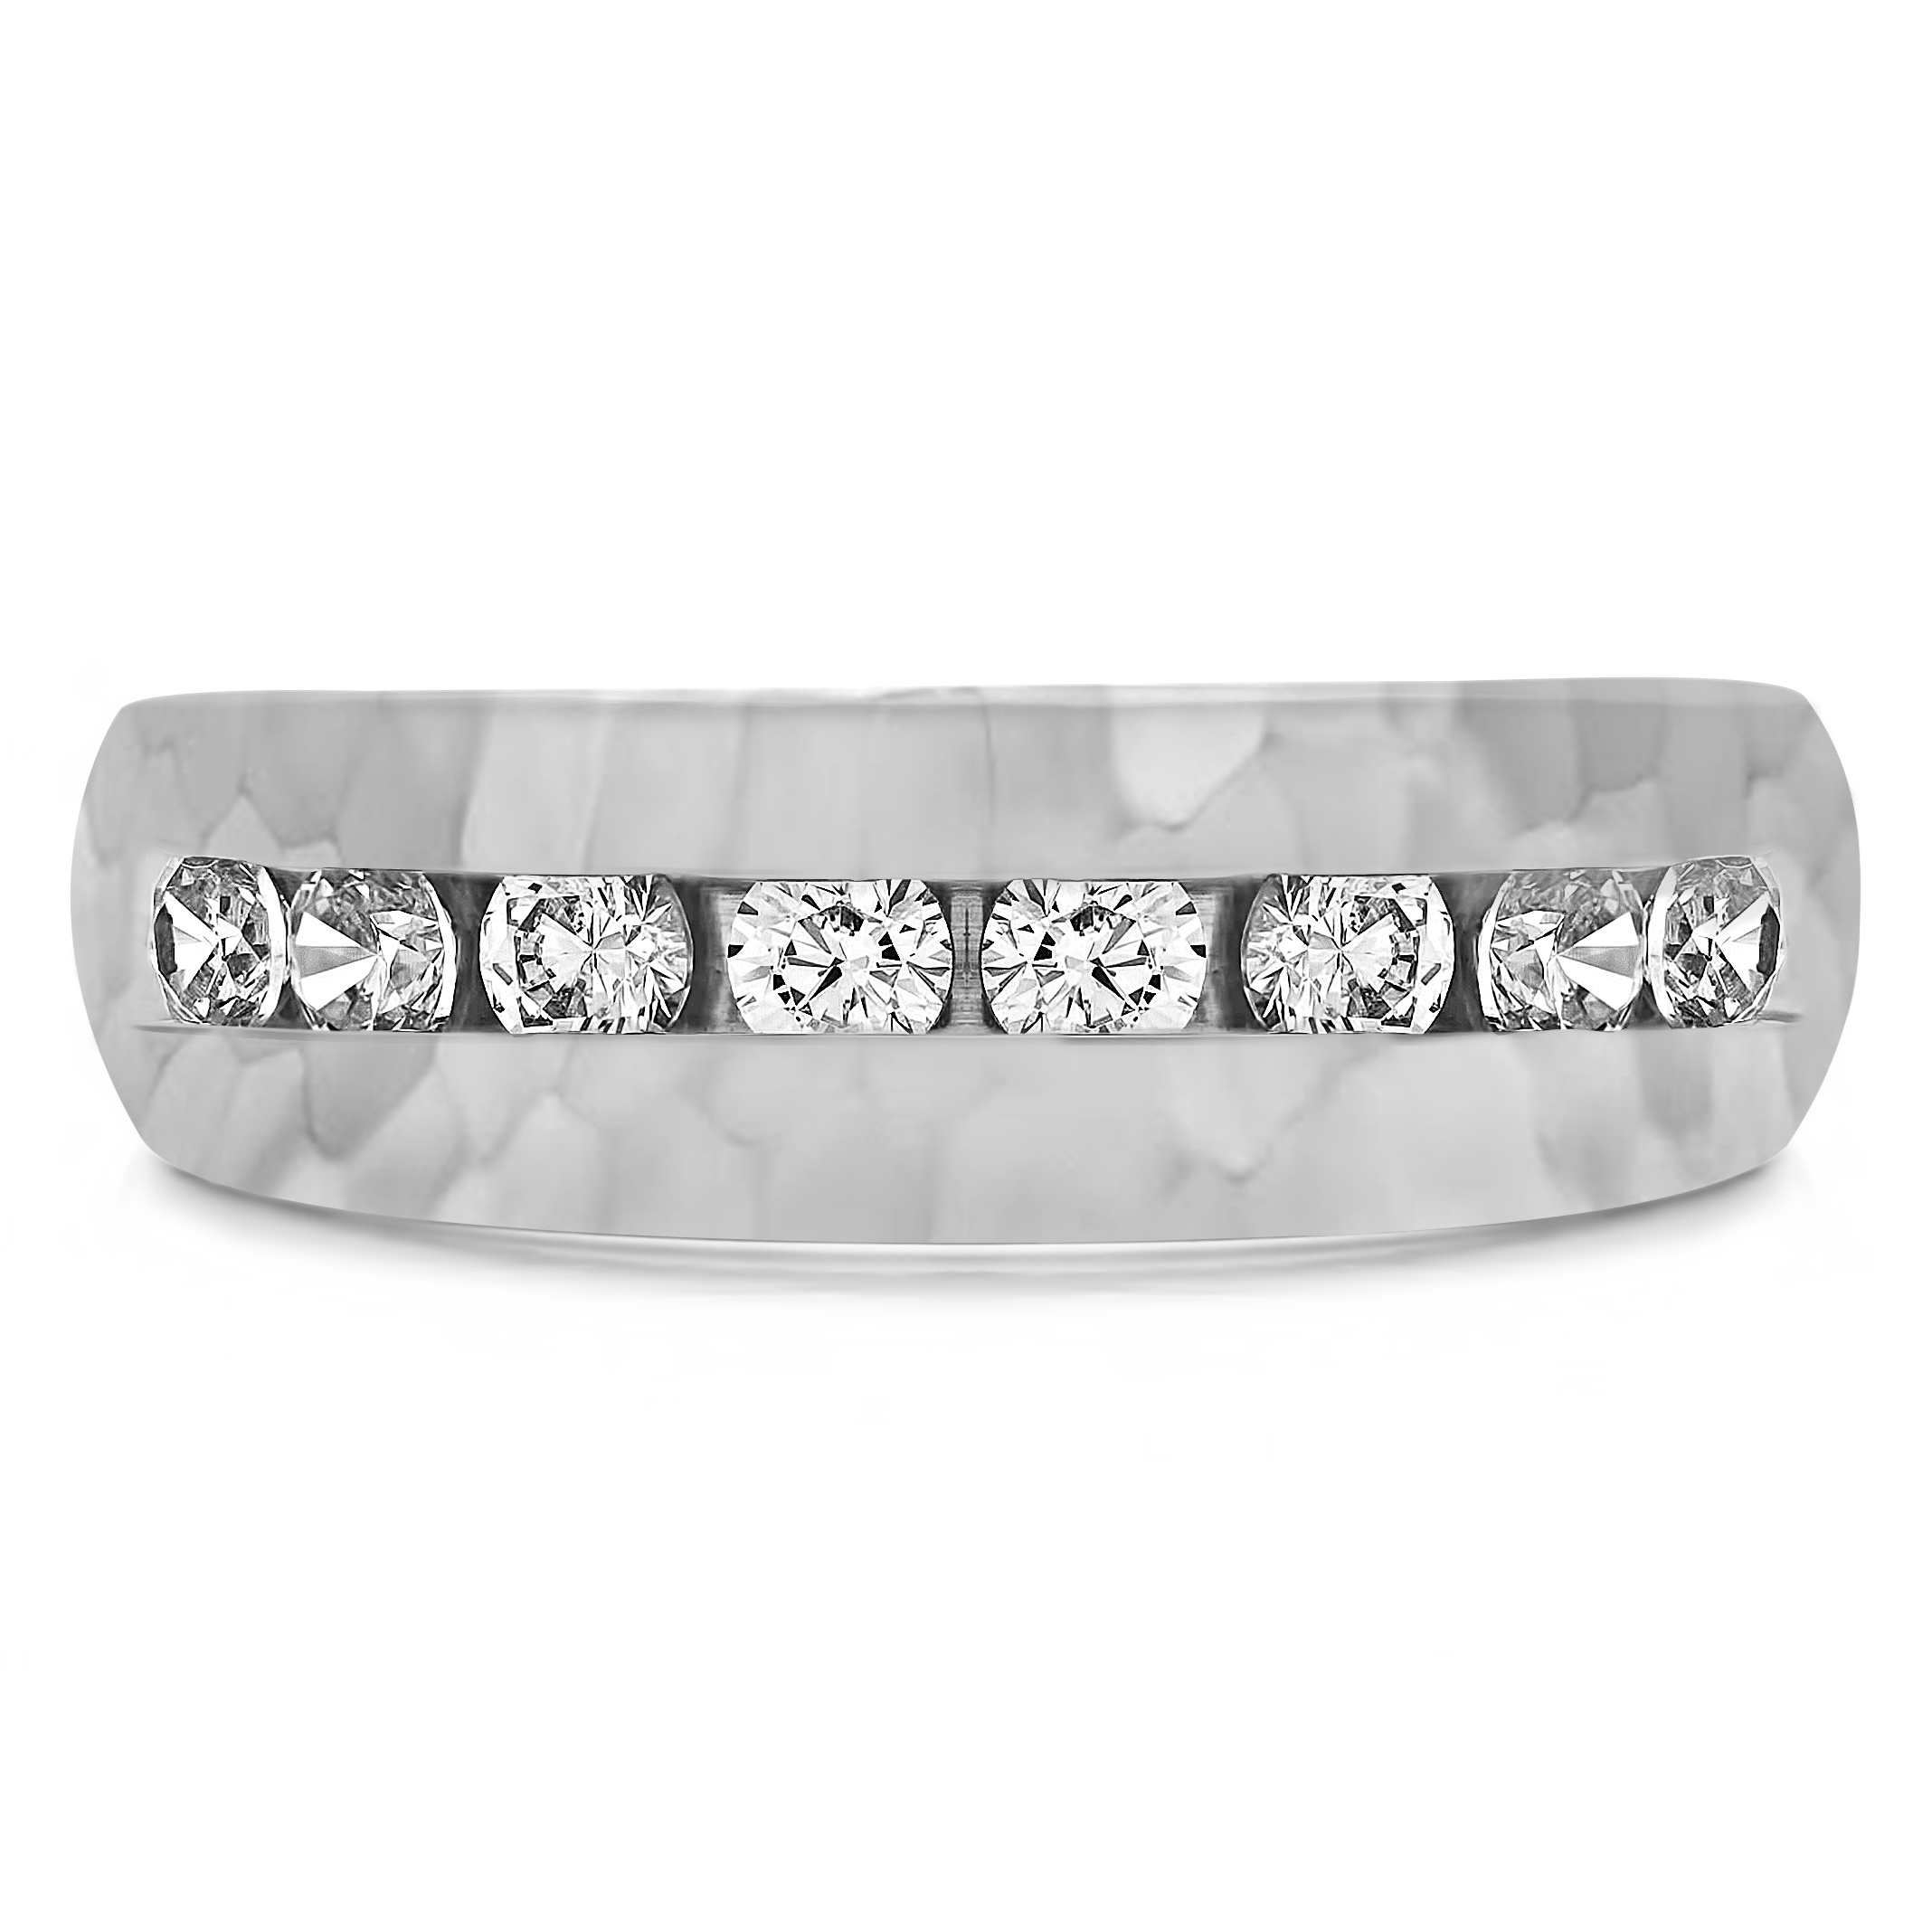 TwoBirch Channel set Men's Band with Open Ended channel with Hammered Finish in 10k White Gold with Diamonds (G-H,I2-I3) (1 CT)